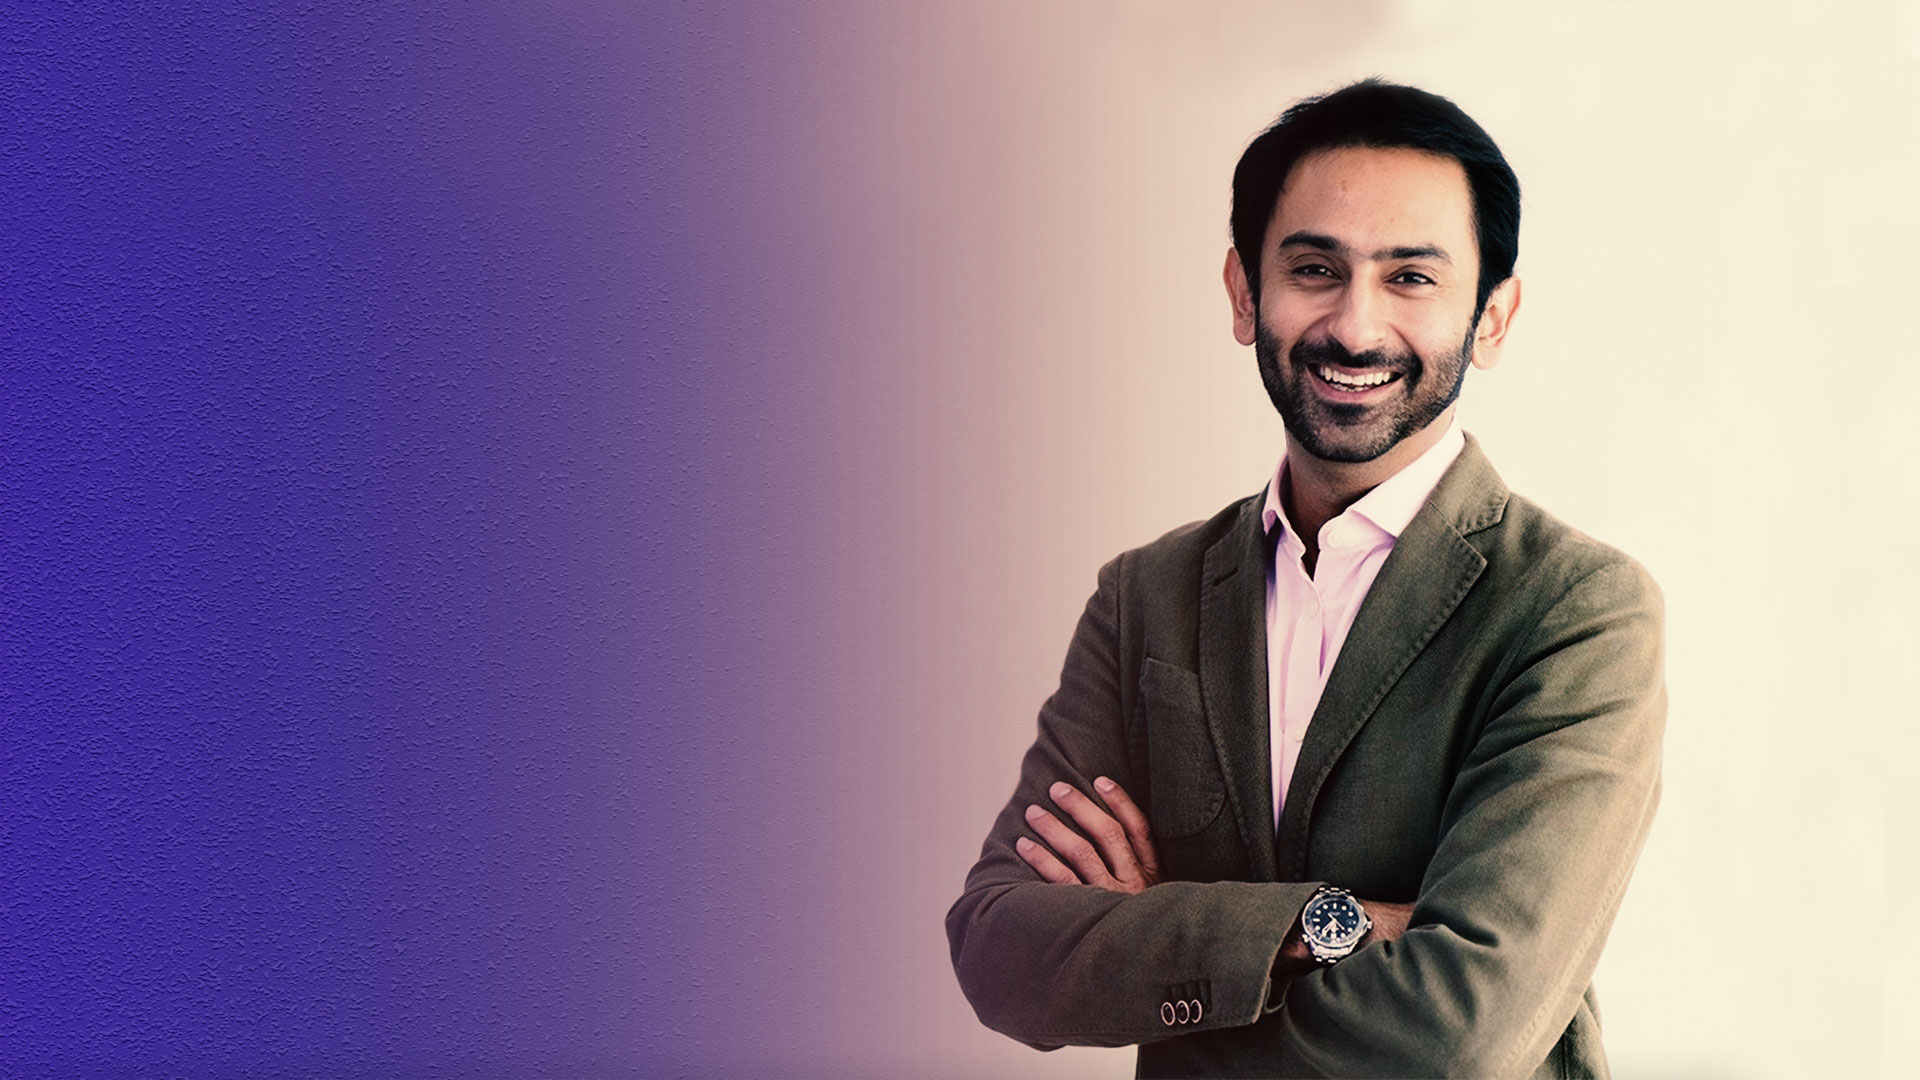 Whatever you do, go big: In conversation with MD Careem